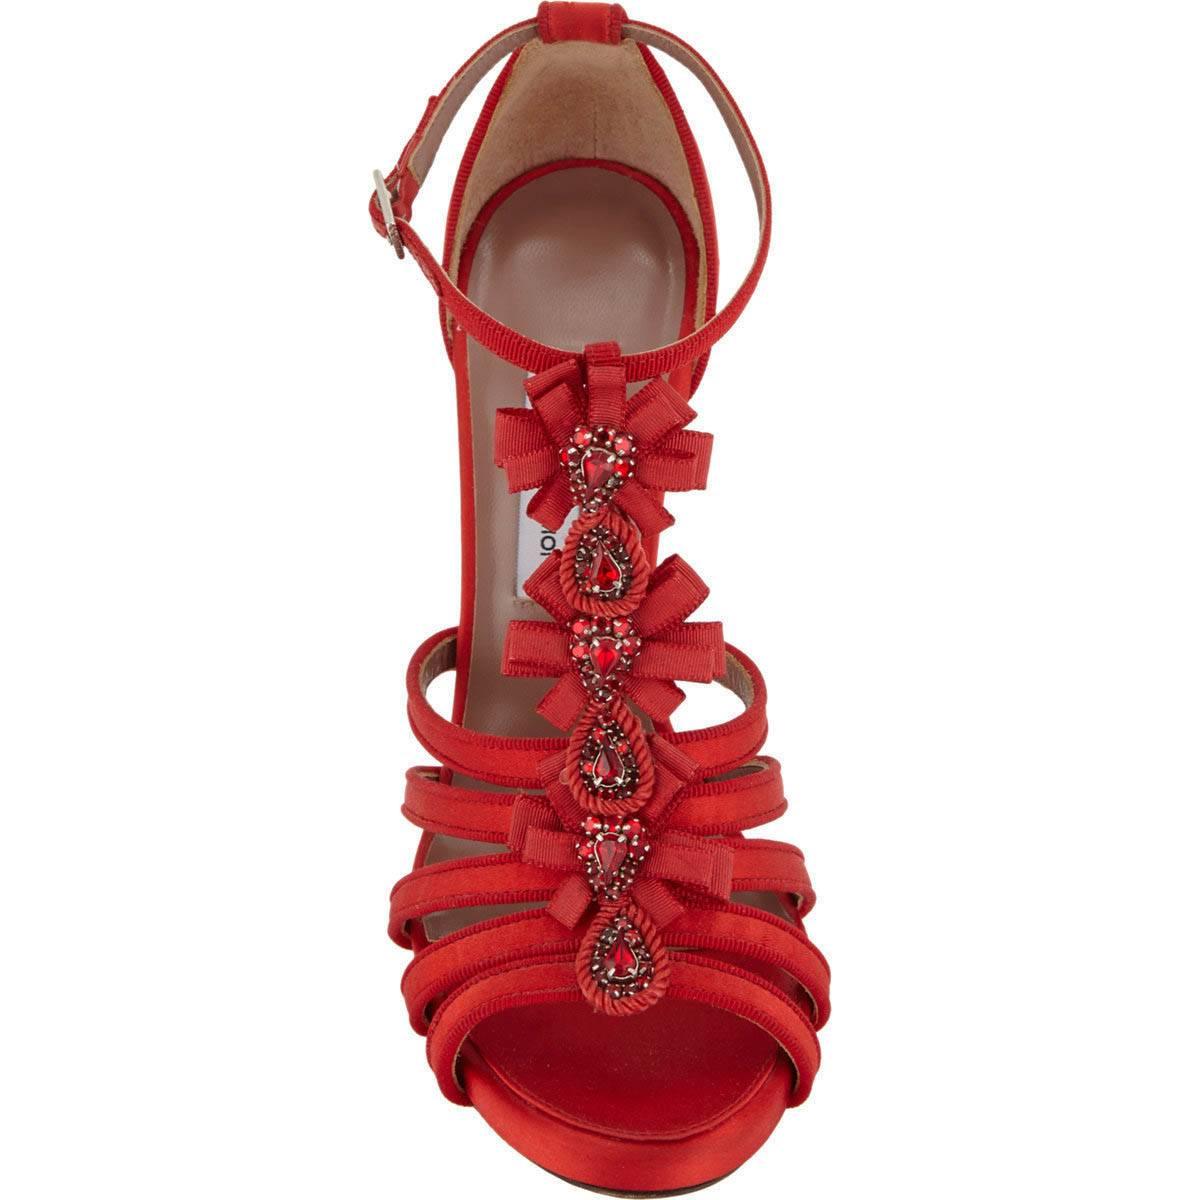 New $1295 TABITHA SIMMONS Jewel-Embellished T-Strap Red Sandals It.38 ...